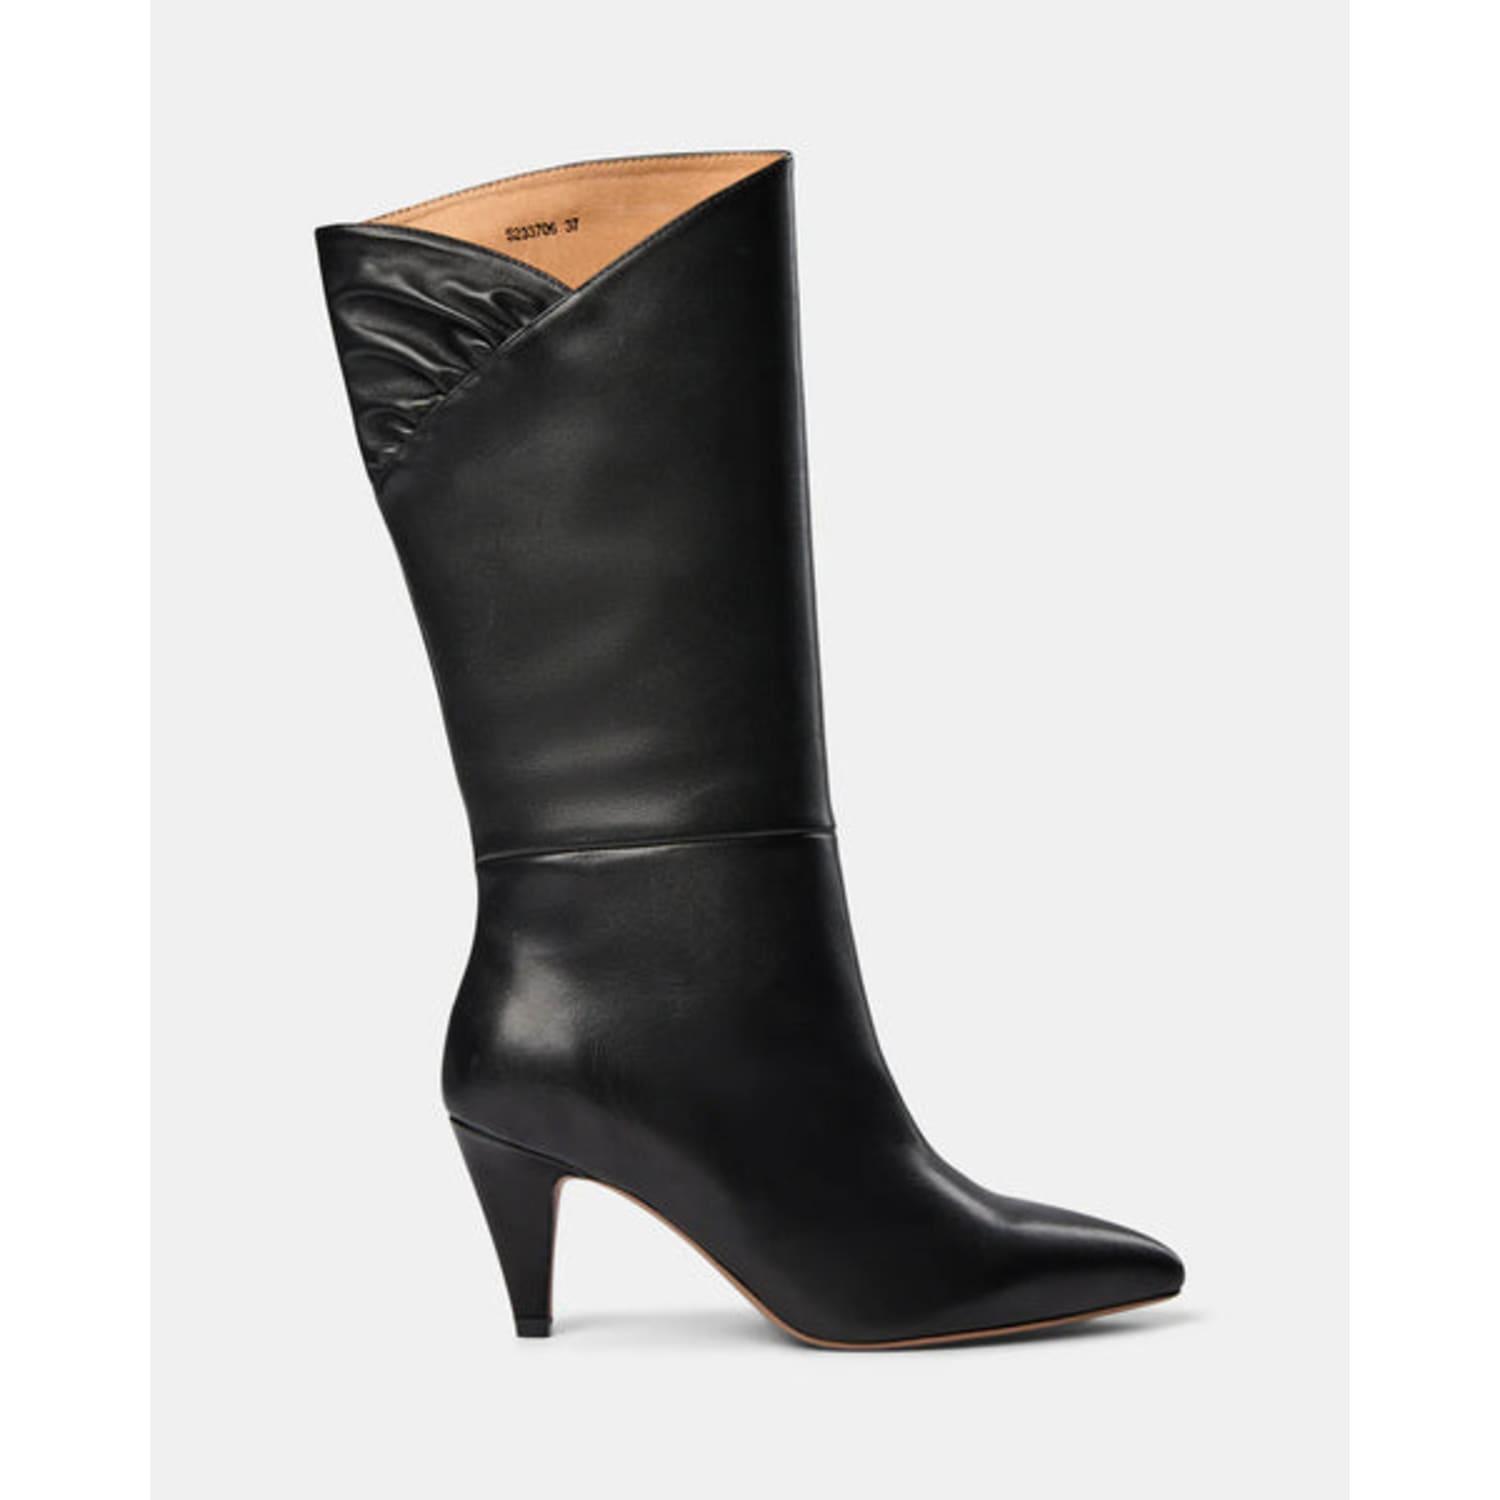 Sofie Schnoor Bevelled Cut Tall Boots in Black | Lyst